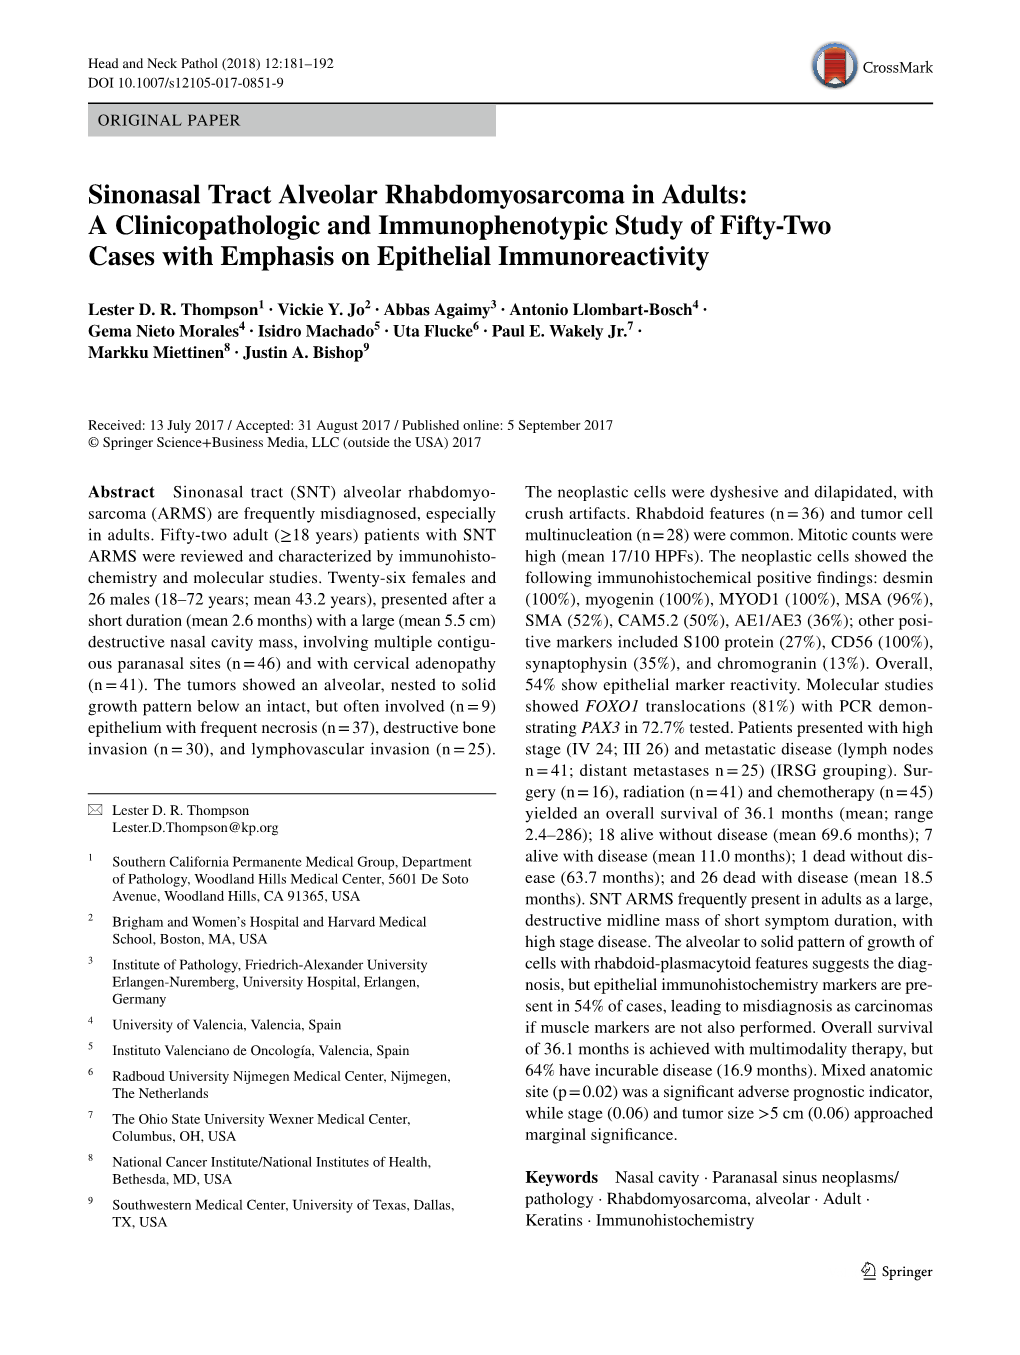 Sinonasal Tract Alveolar Rhabdomyosarcoma in Adults: a Clinicopathologic and Immunophenotypic Study of Fifty-Two Cases with Emphasis on Epithelial Immunoreactivity